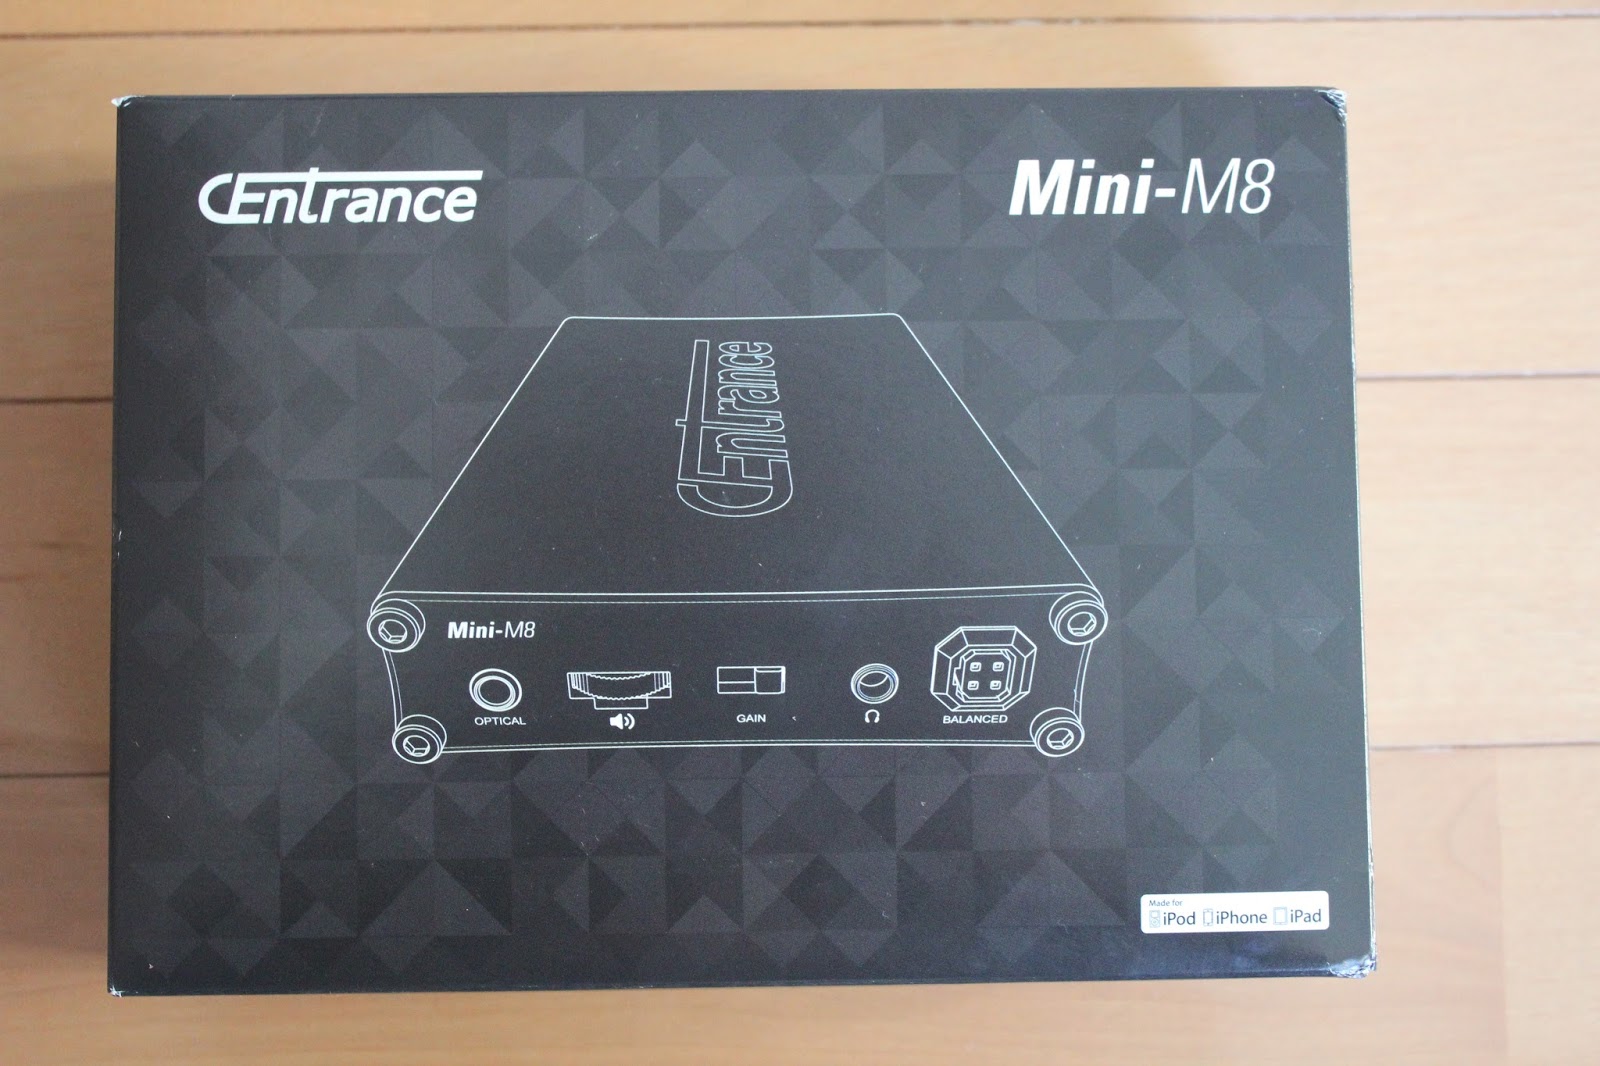 Centrance Mini-M8, my mini review and general impressions.